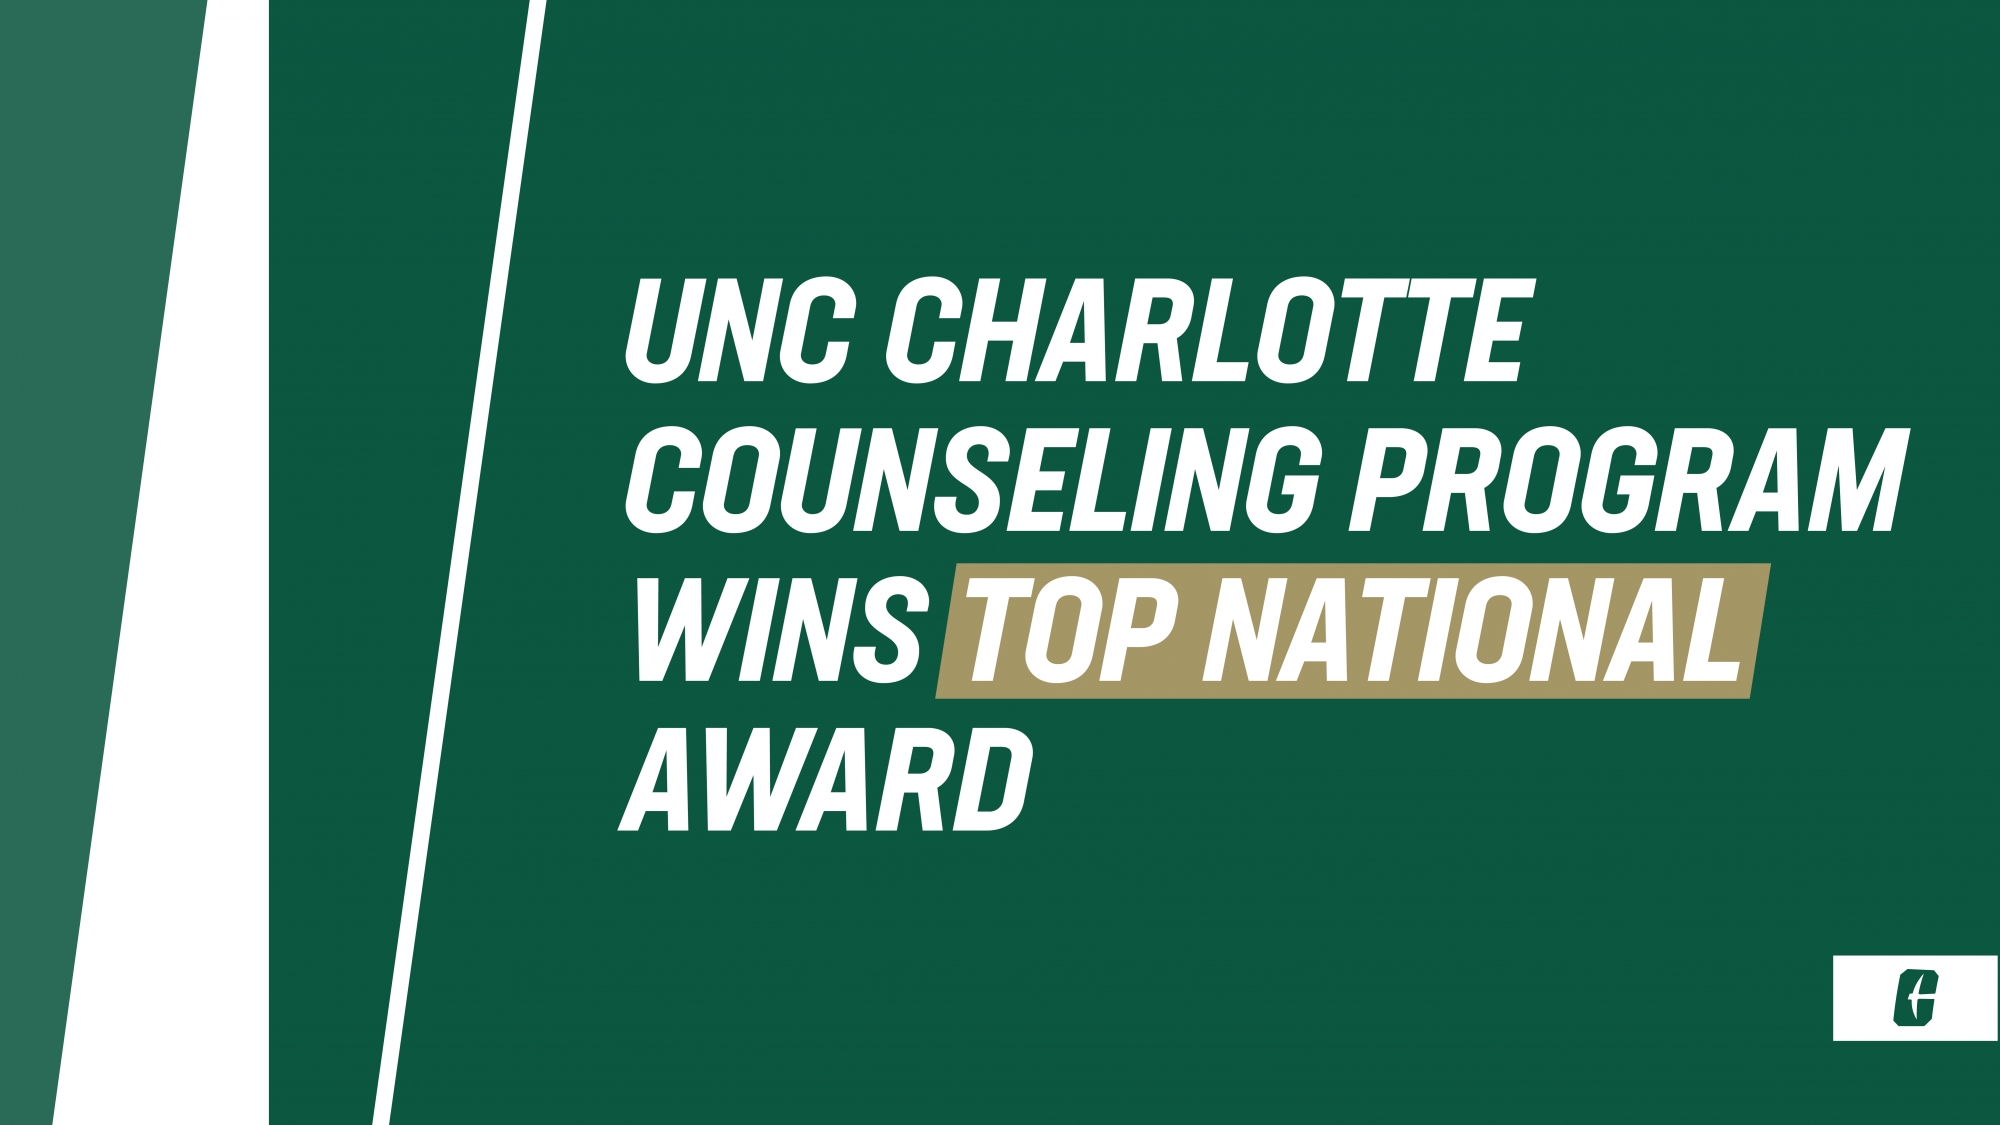 Counseling program receives top national honor